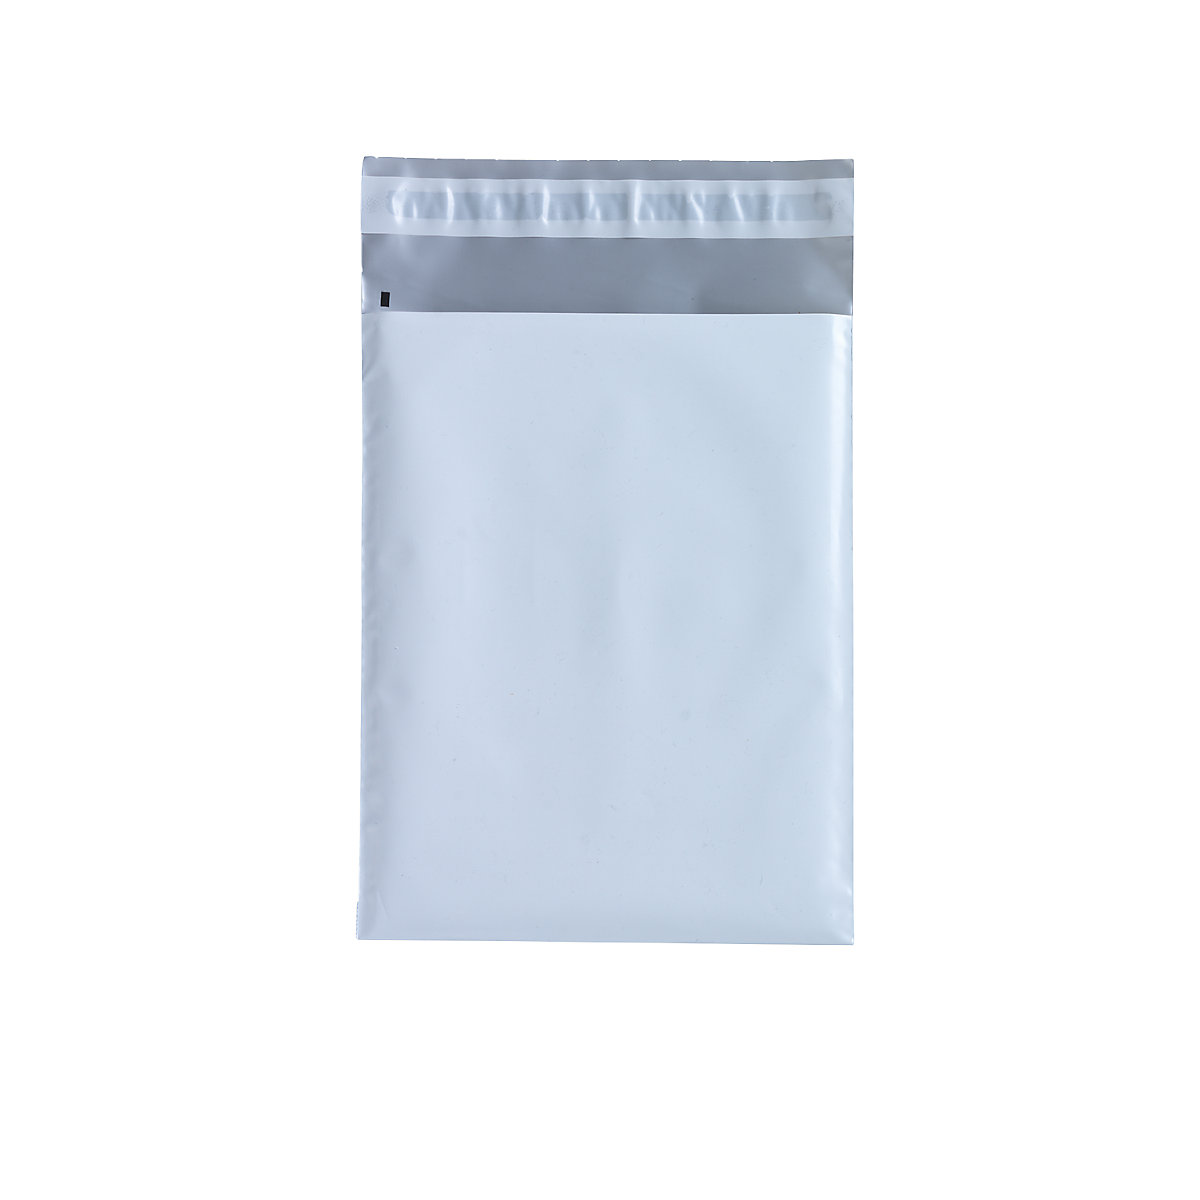 Dispatch bag, non-transparent, single adhesive seal, LxW 220 x 165 mm, pack of 1000-2